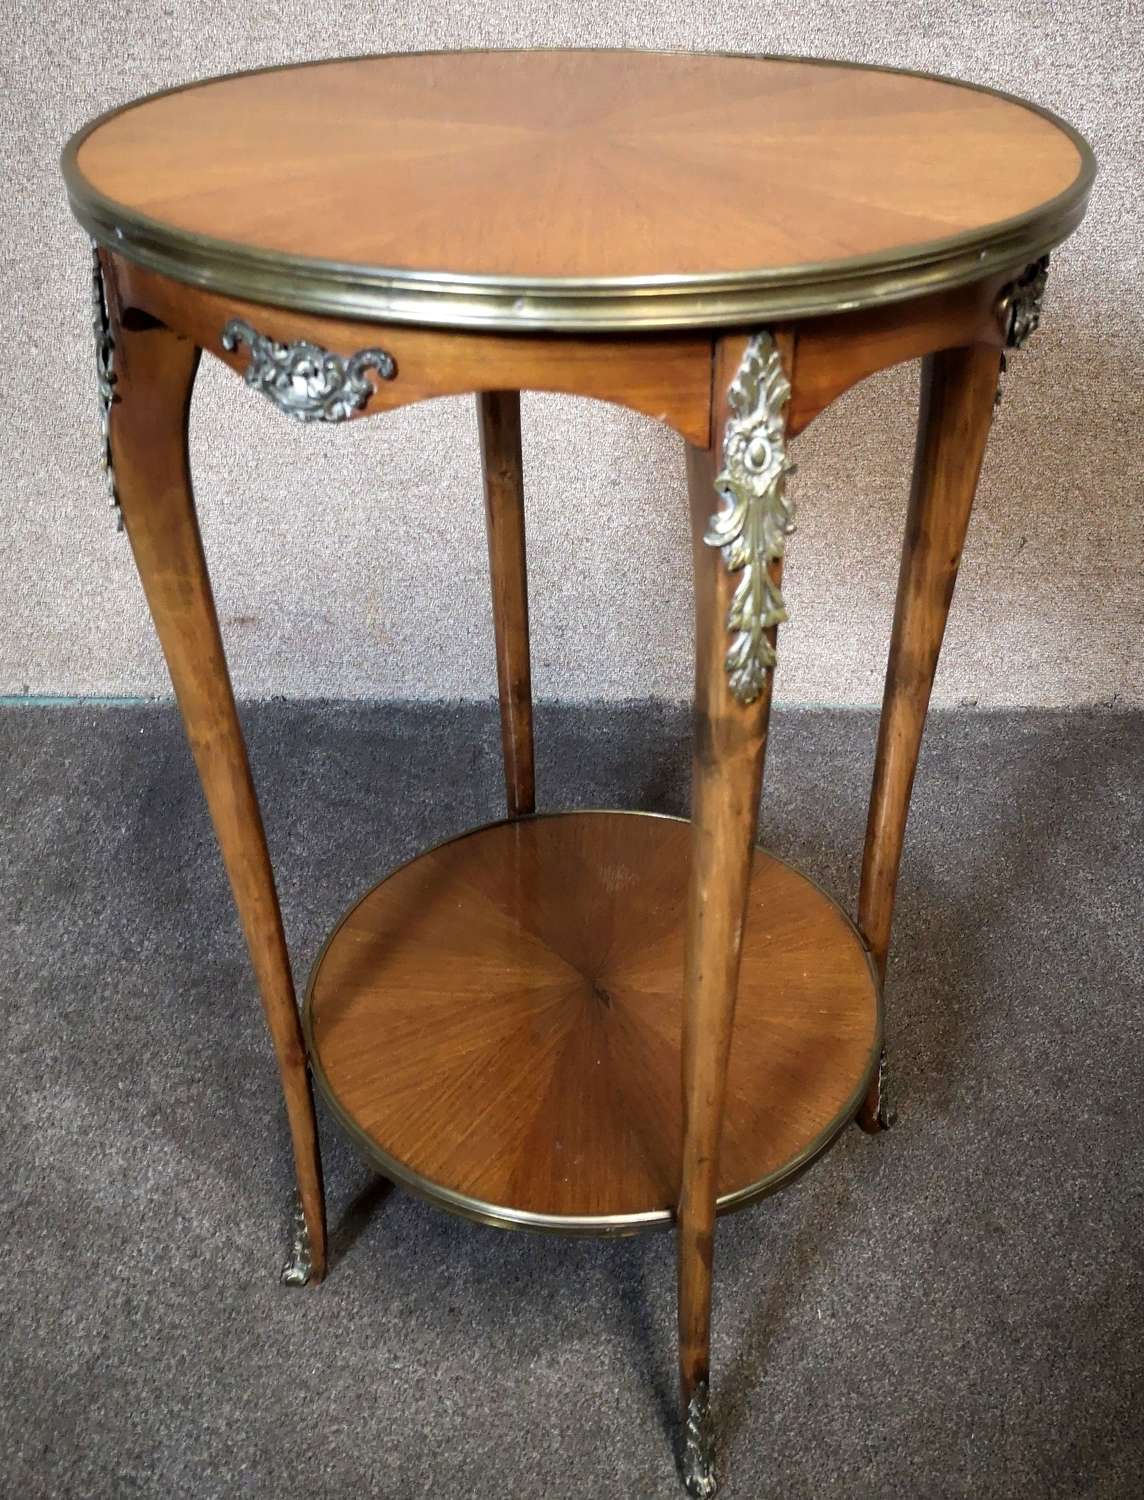 Antique French Reproduction Lamp Table / Gueridon